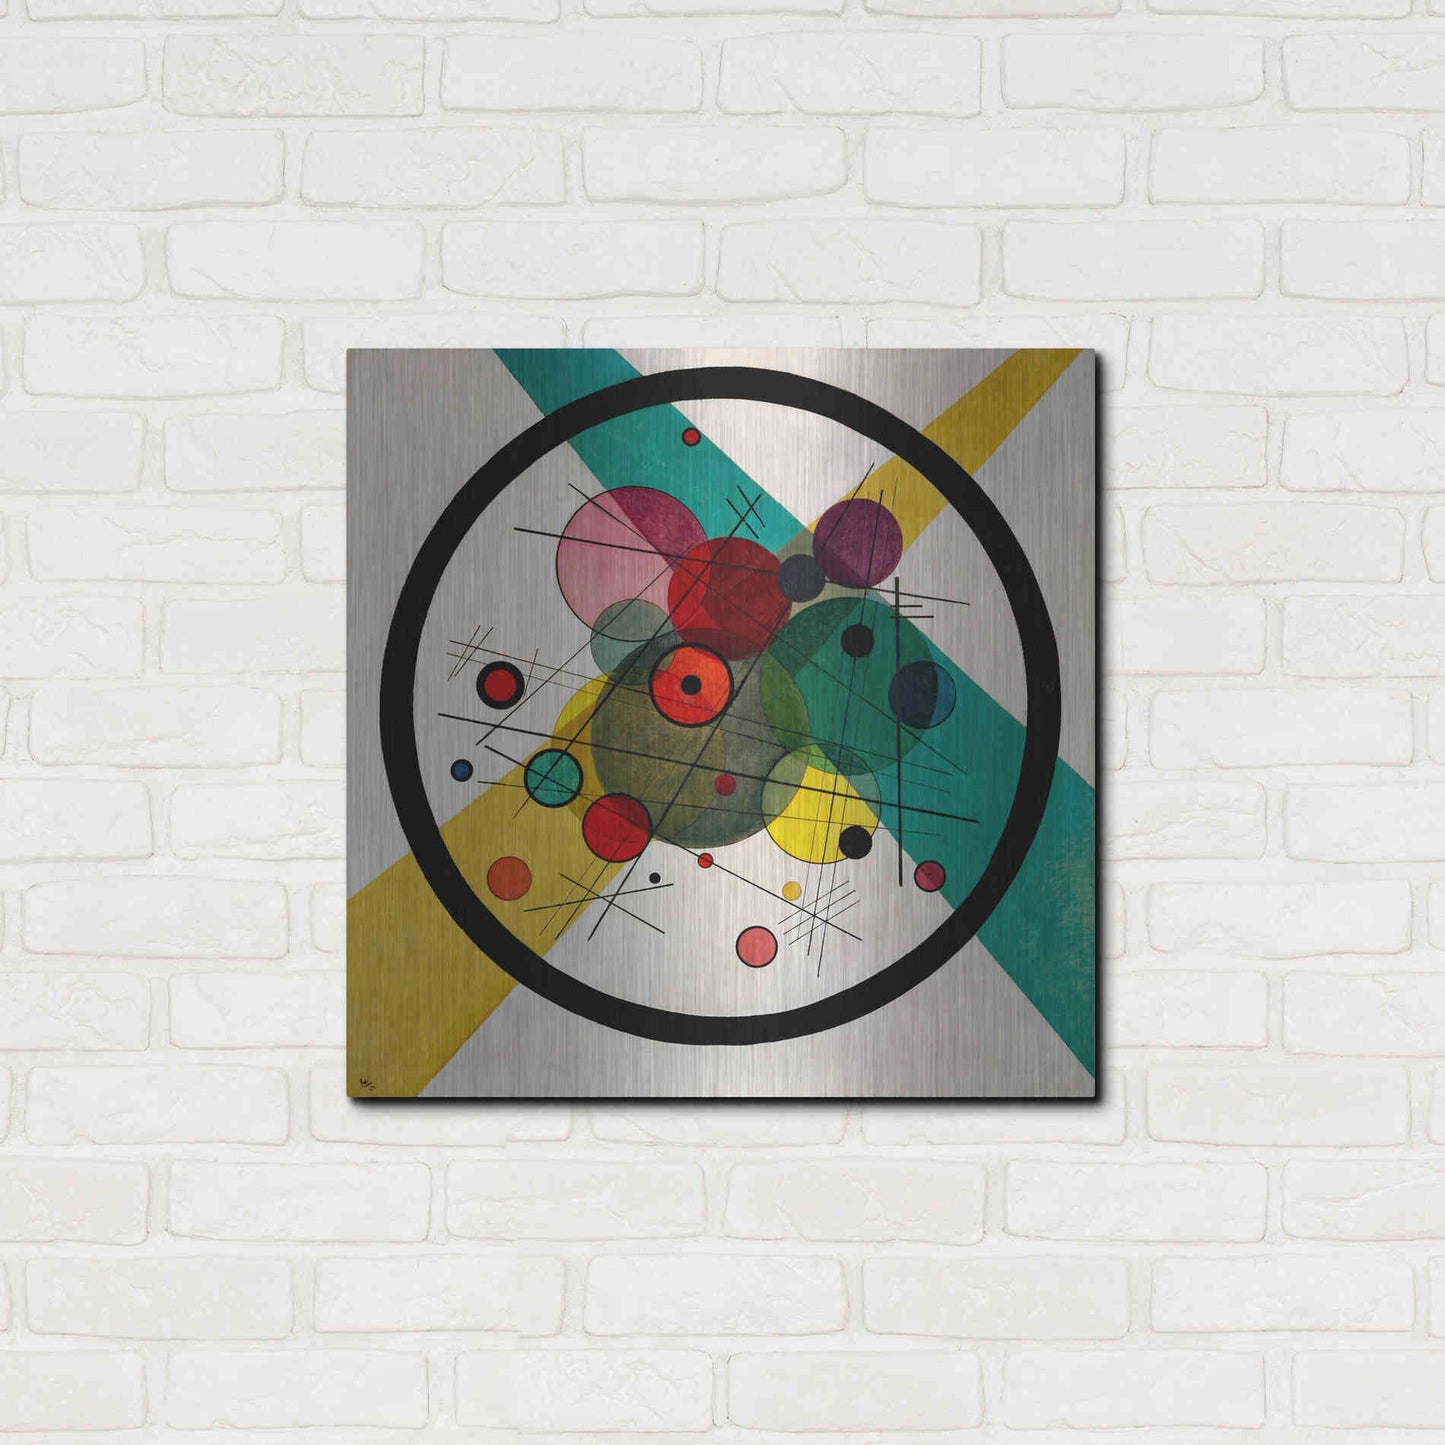 Luxe Metal Art 'Circles In A Circle' by Wassily Kandinsky, Metal Wall Art",24x24